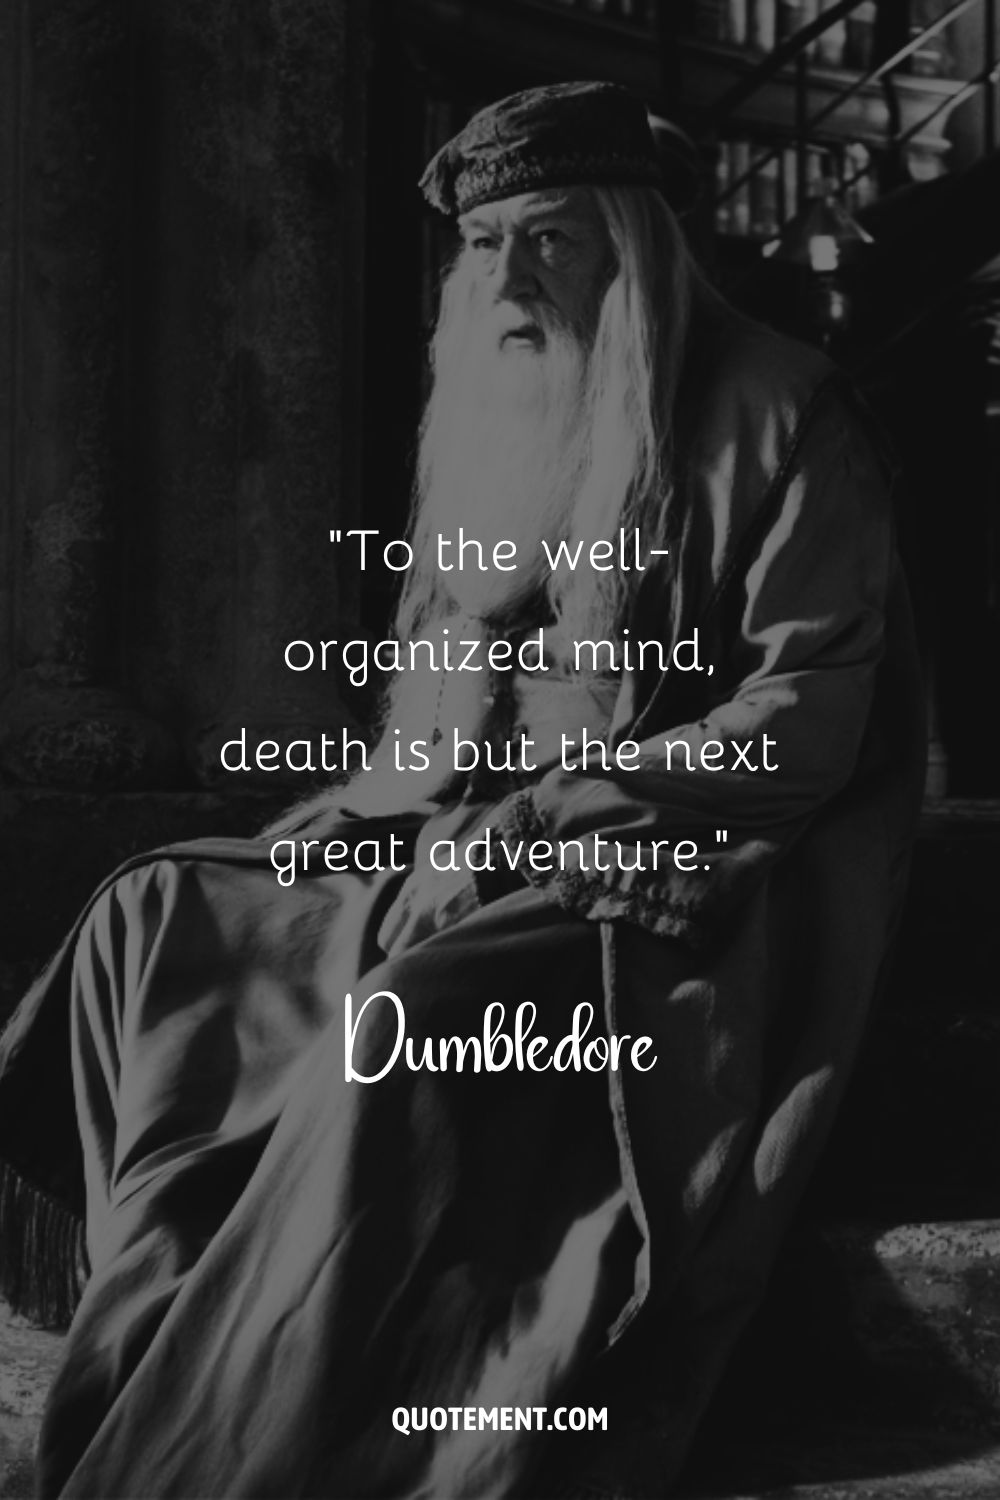 To the well-organized mind, death is but the next great adventure